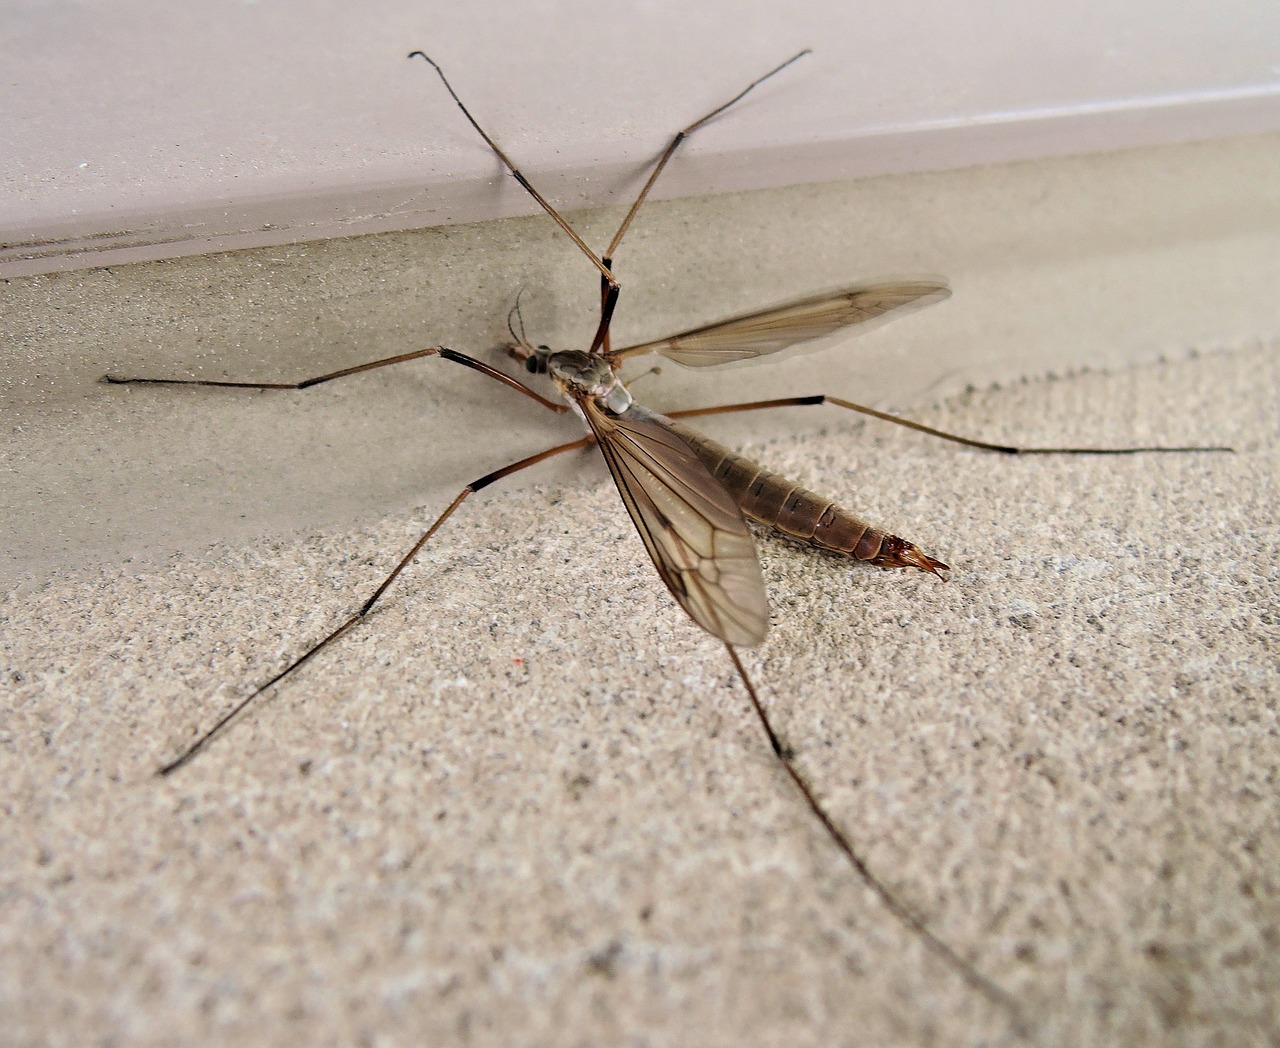 Giant Mosquito? Mosquito-Eater? Nope, It's a Crane Fly!